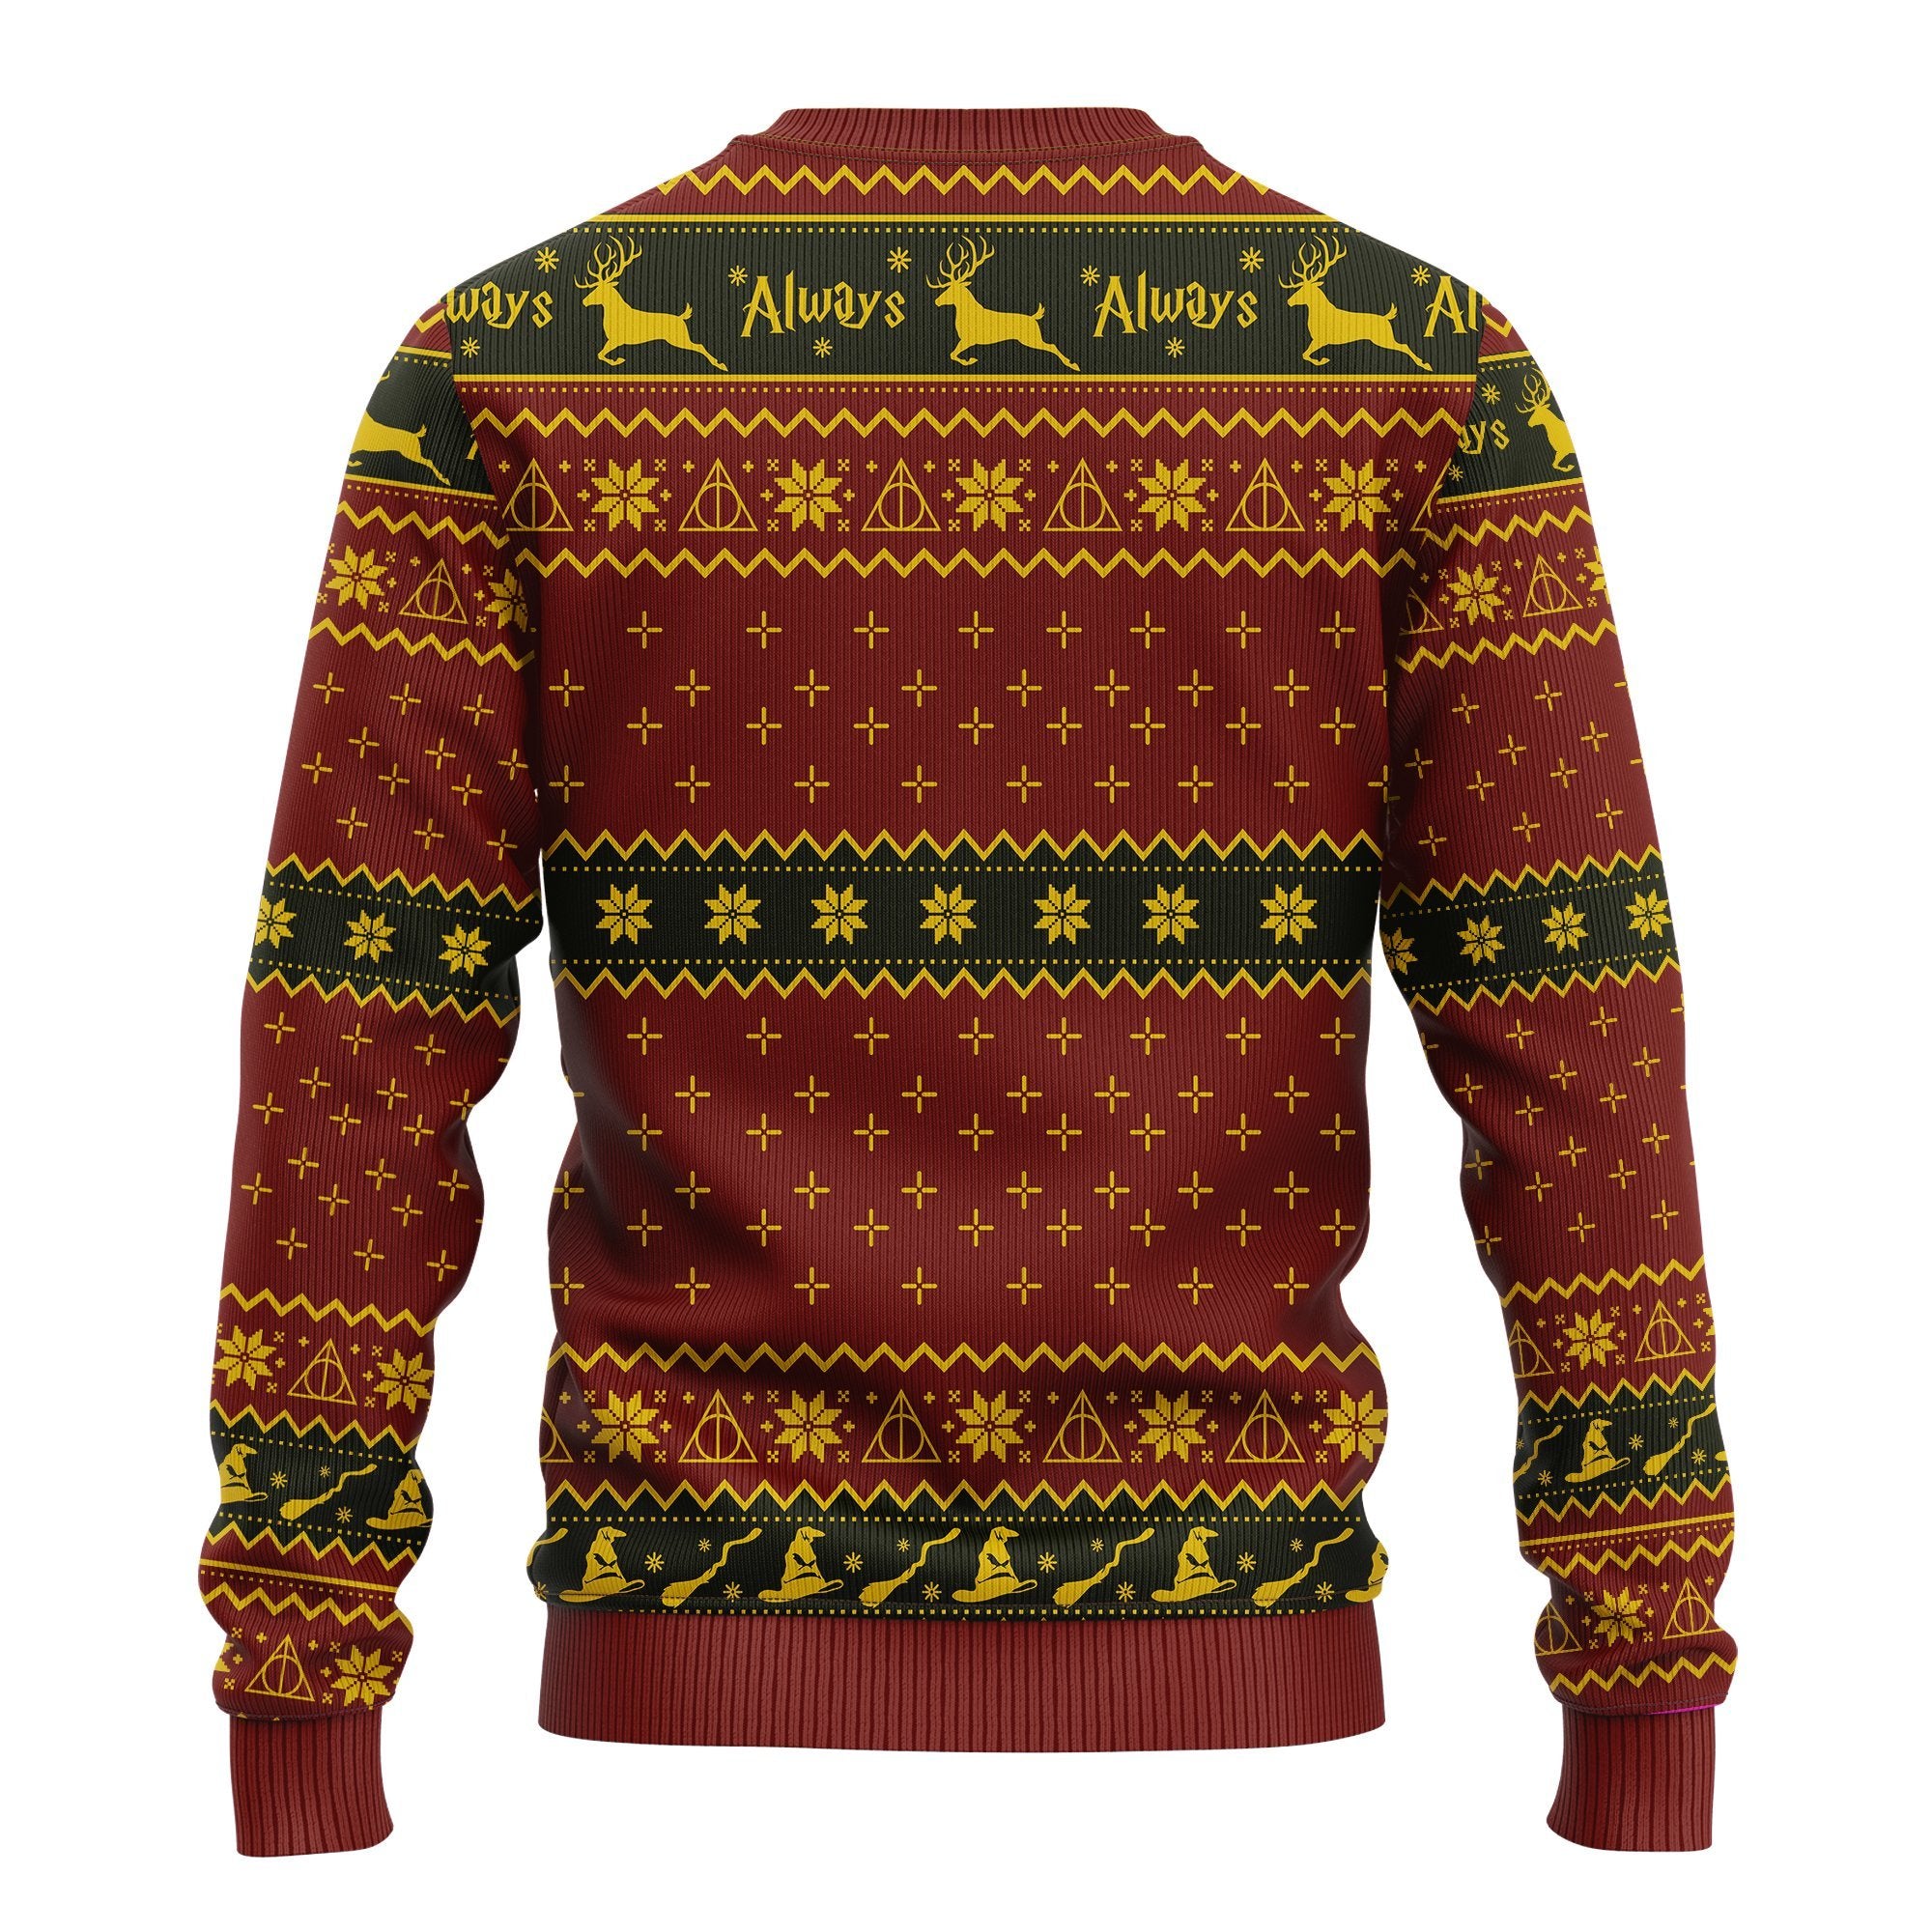 Gryffindor Crest Ugly Christmas Sweater Amazing Gift Idea Thanksgiving Gift